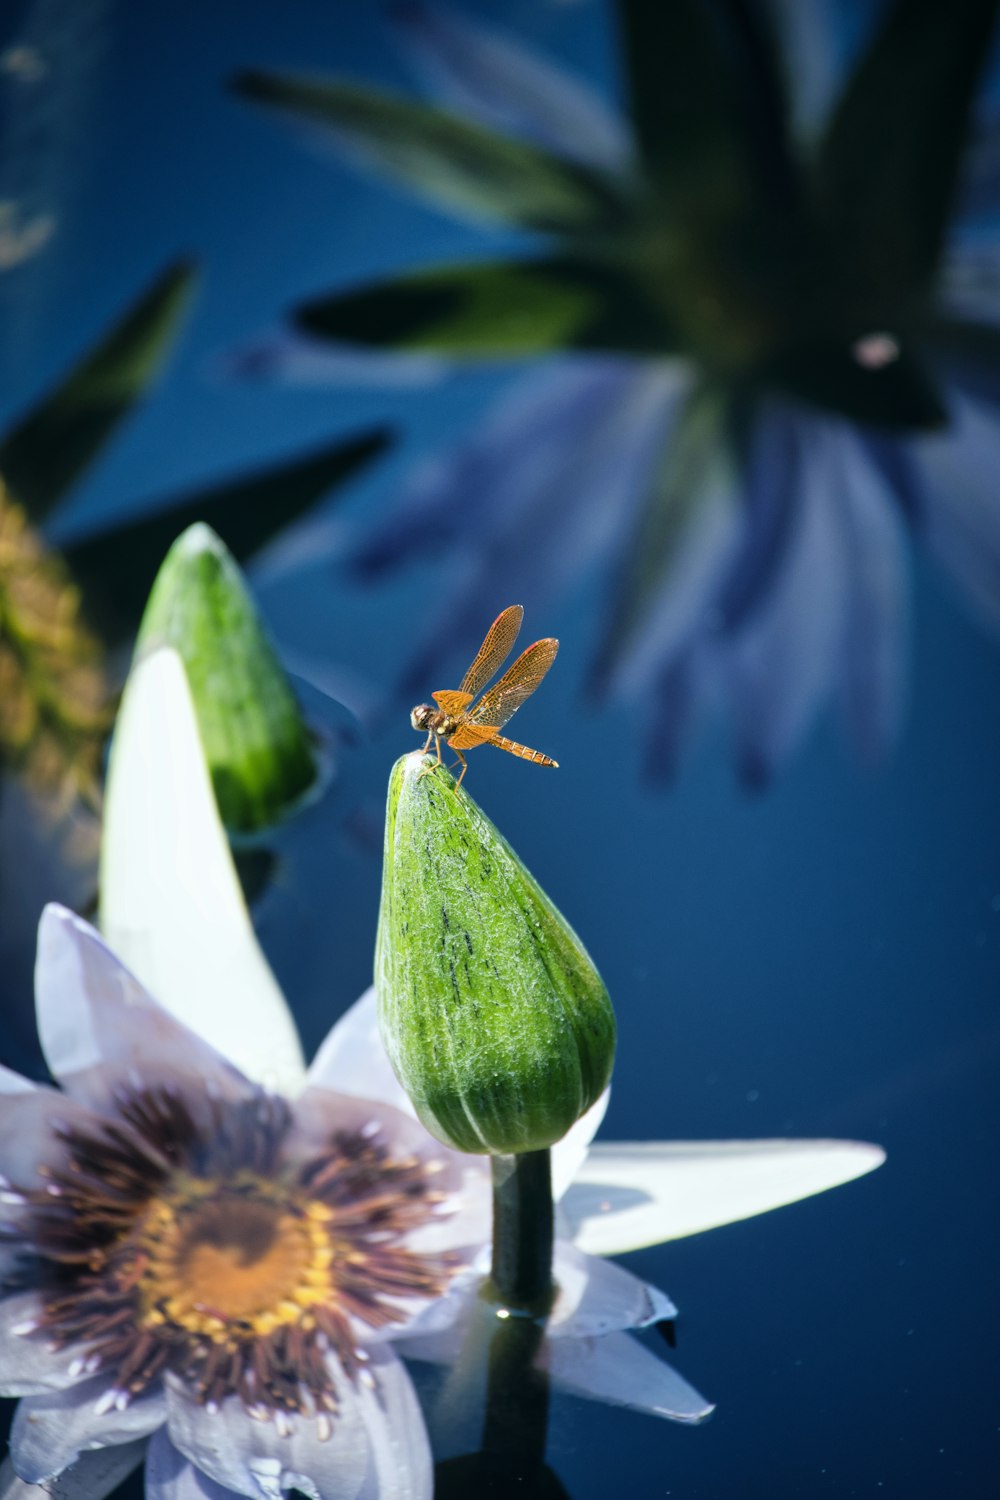 brown and yellow dragonfly perched on white flower